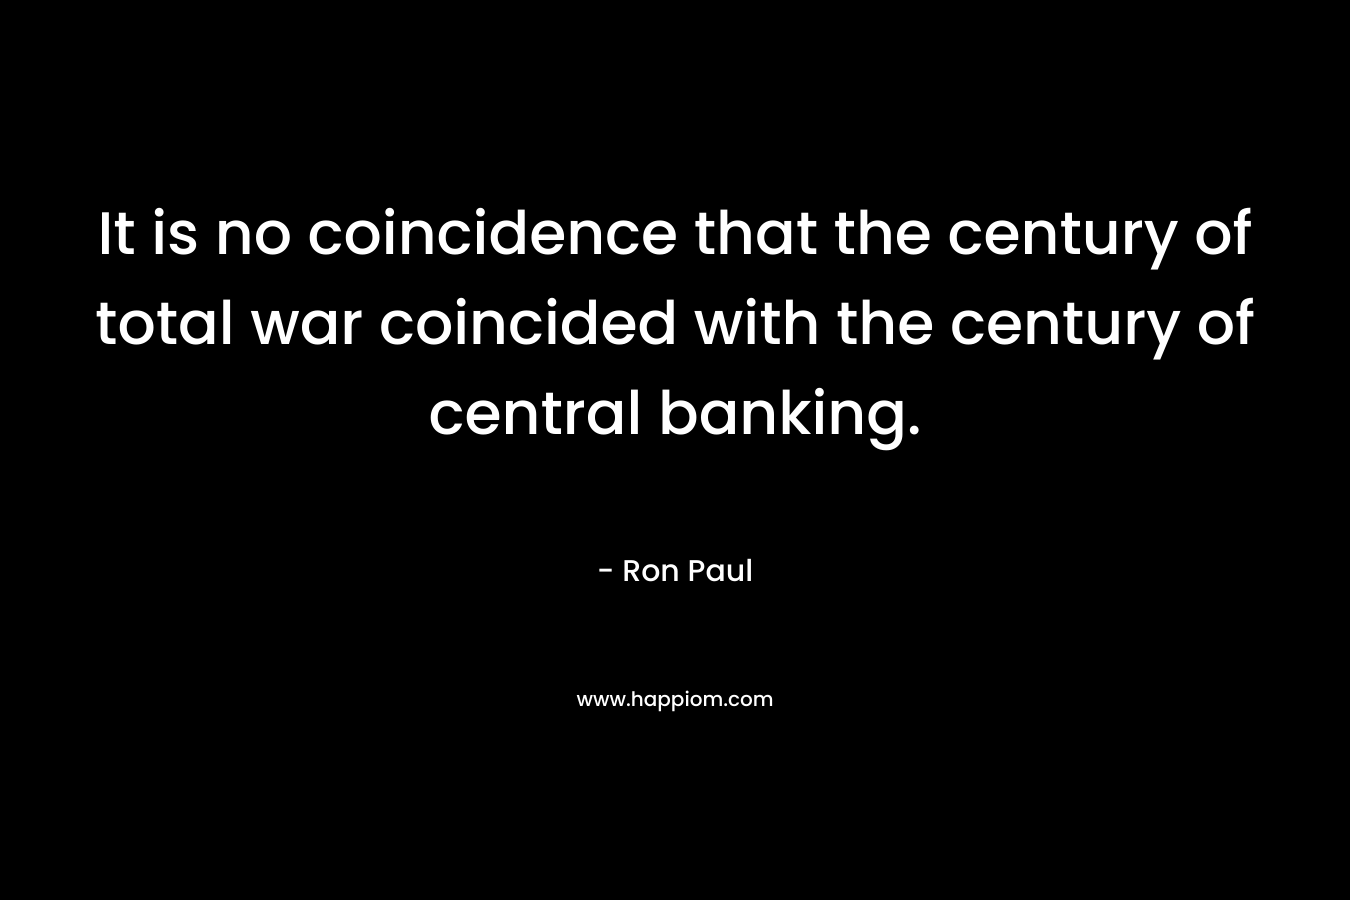 It is no coincidence that the century of total war coincided with the century of central banking. – Ron Paul